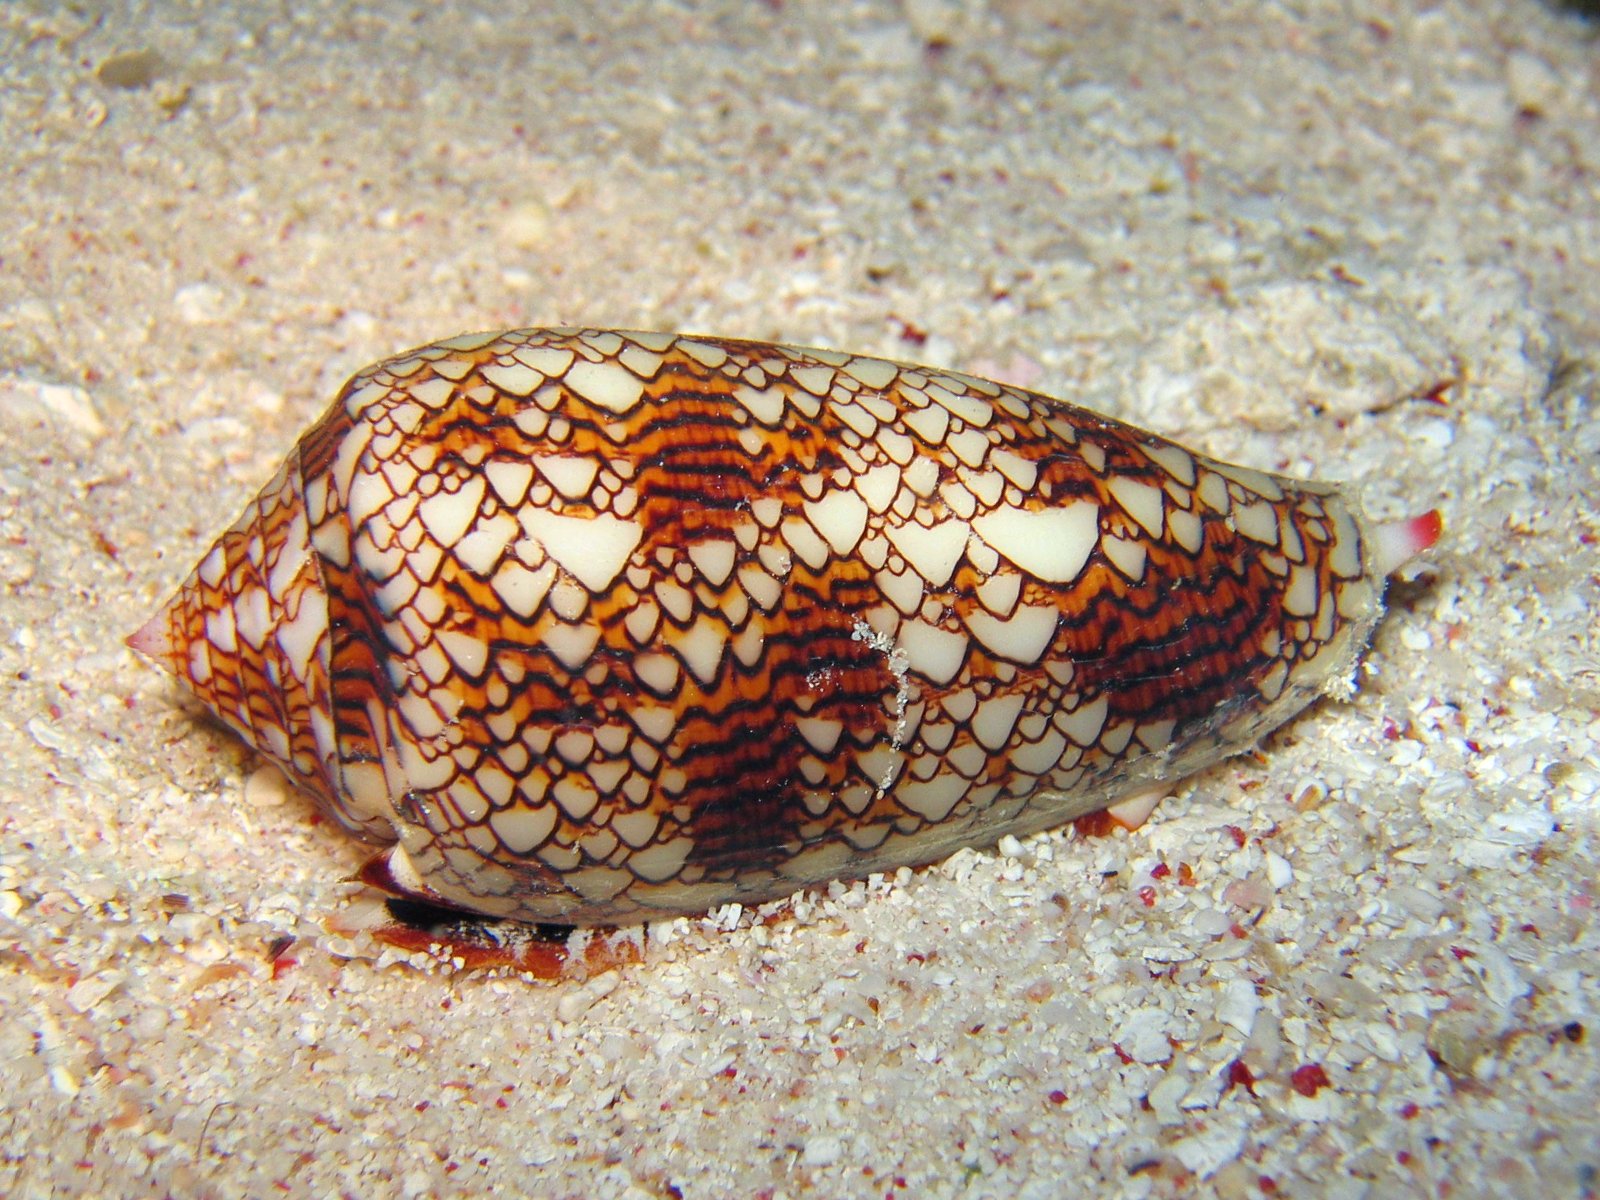 Cone snails use the illusion of sex to catch their next meal